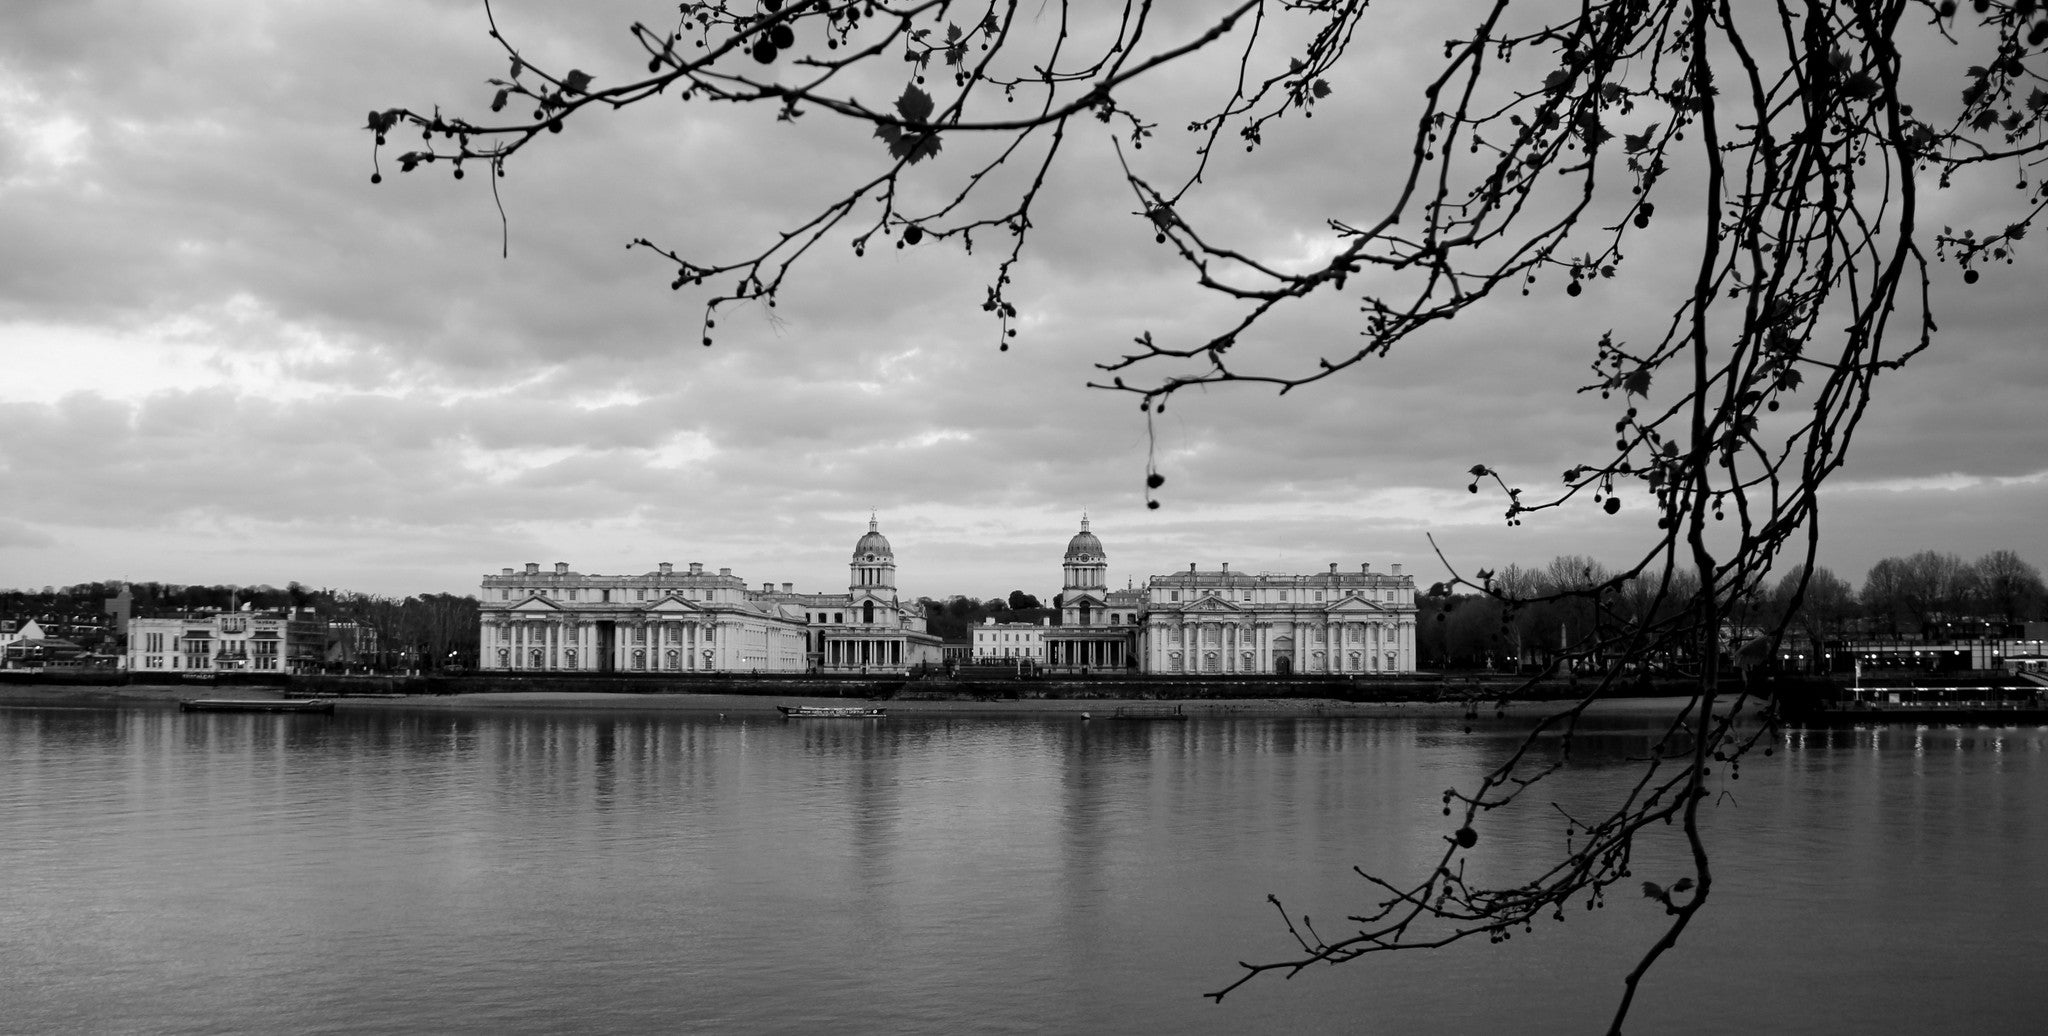 Greenwich Naval College, Panoramic Black and White